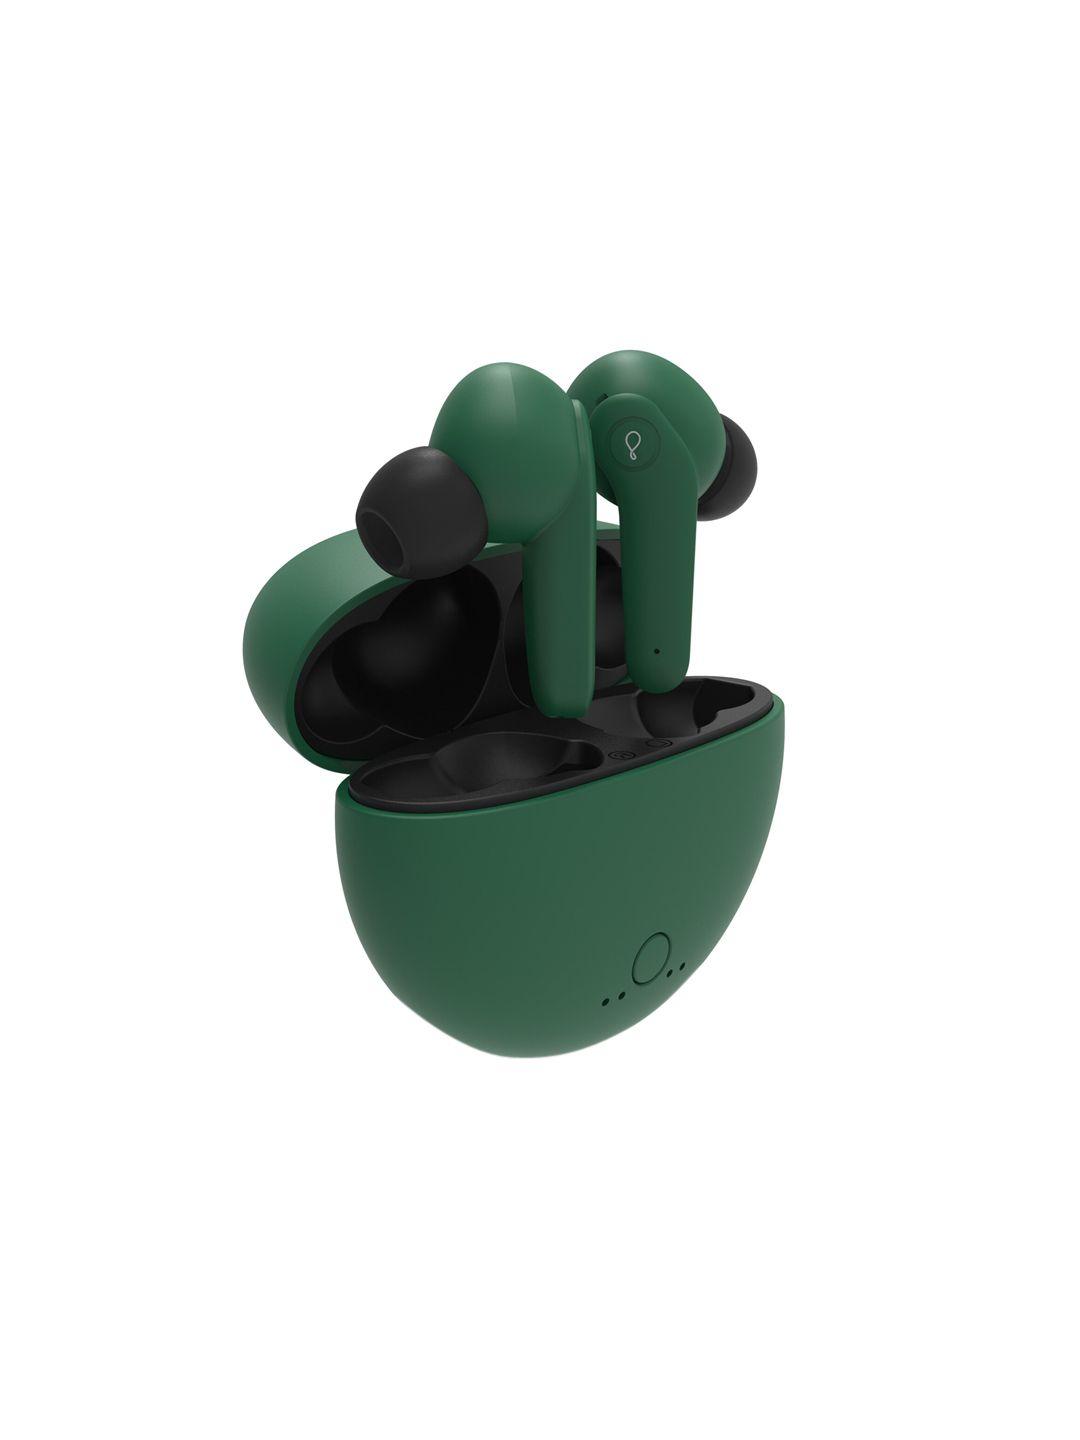 pebble arc tws earbuds, immersive audio, up to 15h playback - green